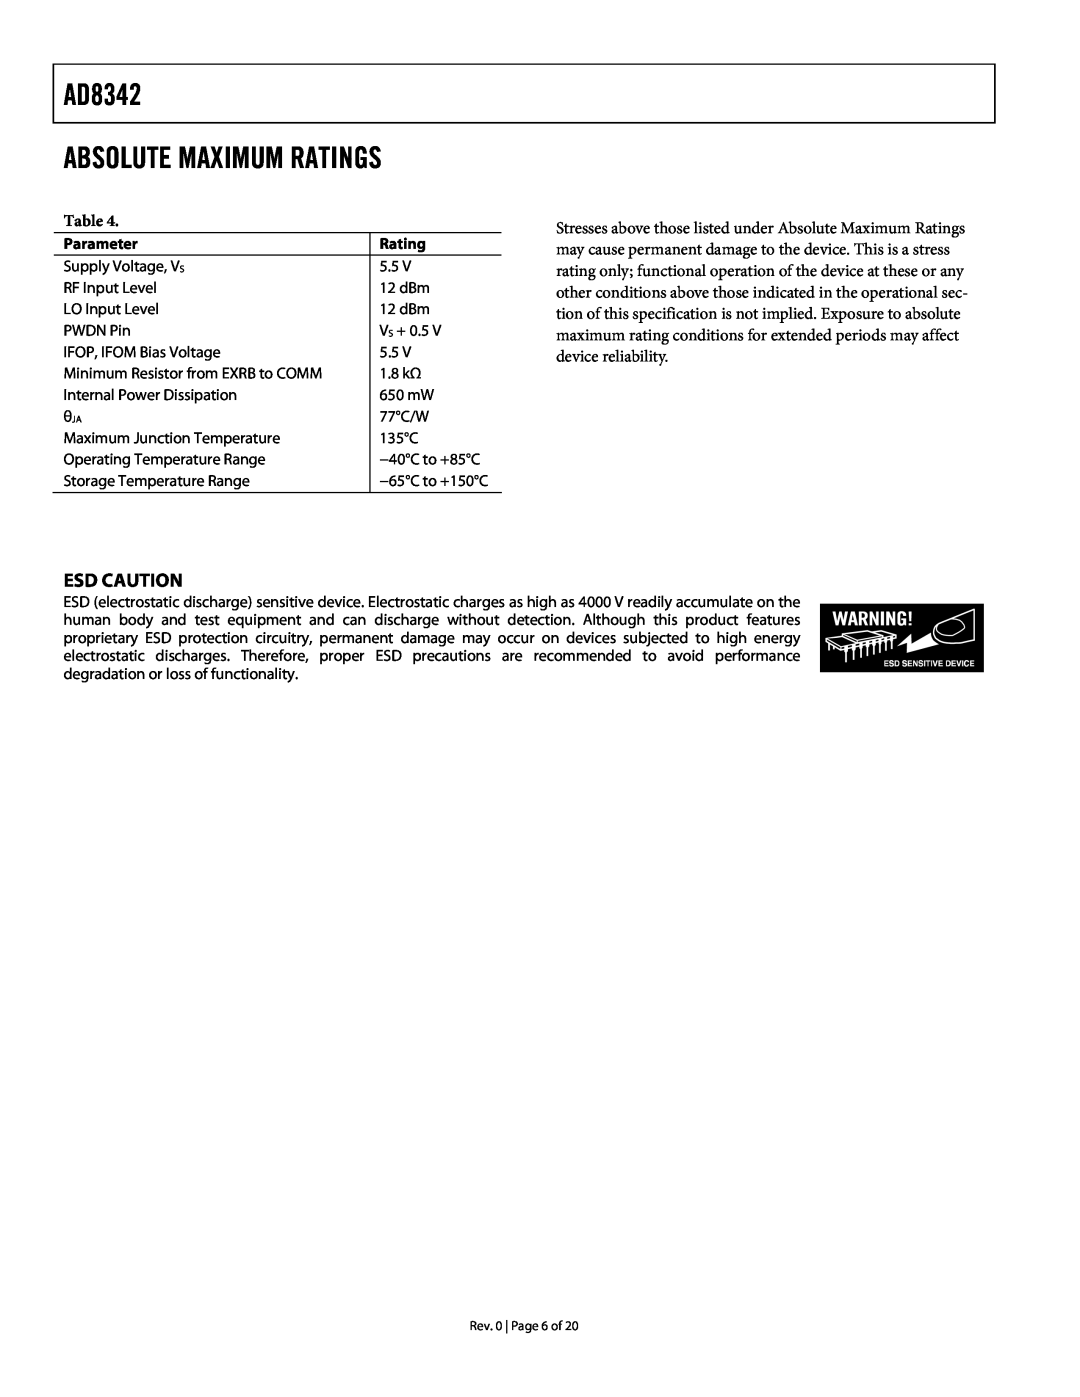 Analog Devices specifications AD8342 ABSOLUTE MAXIMUM RATINGS, Esd Caution 